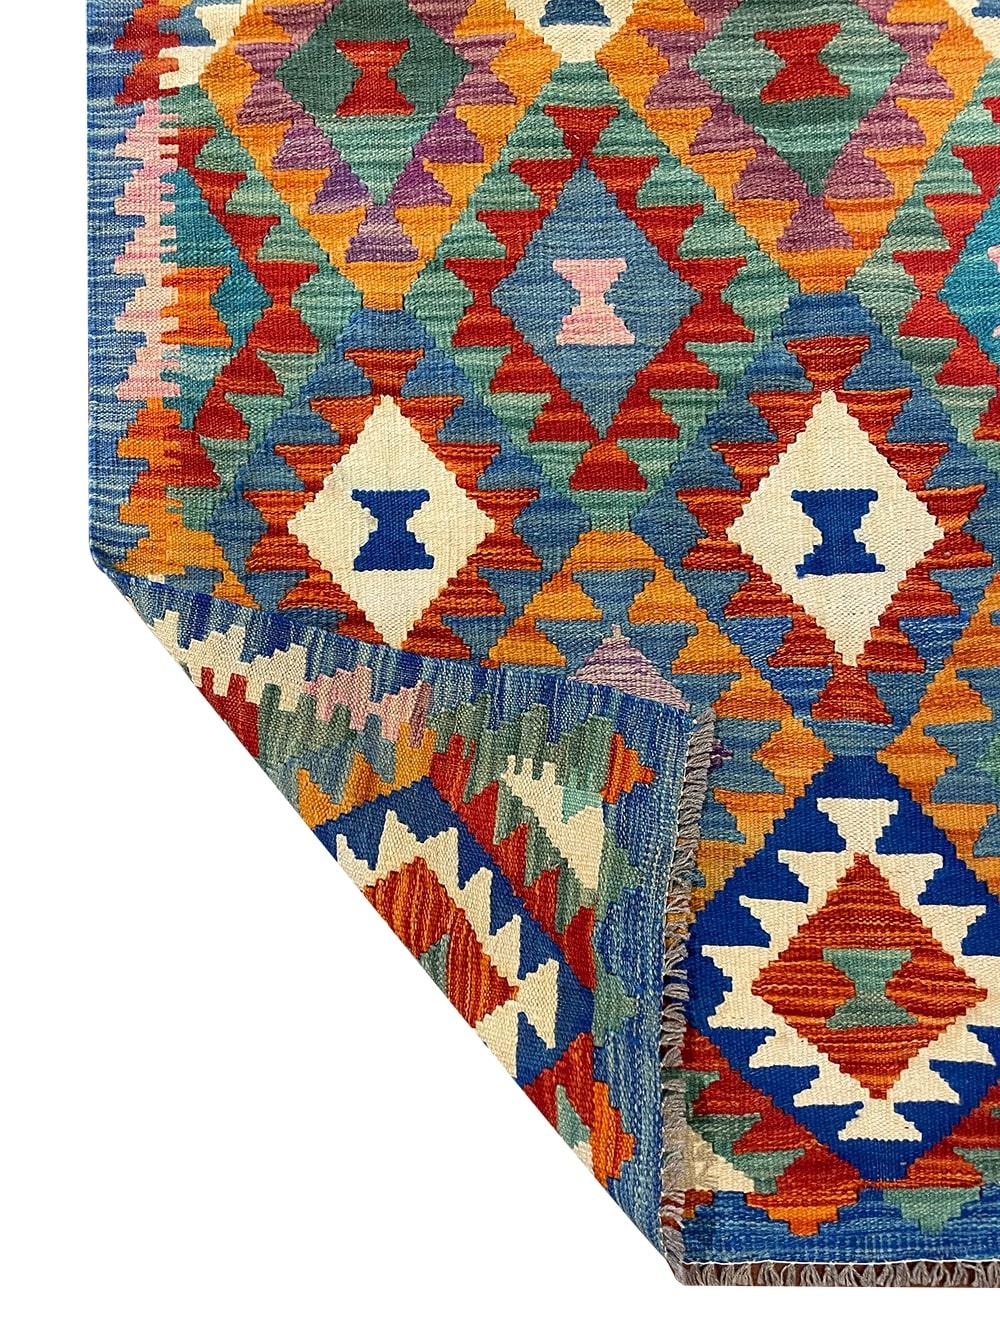 Hand-Woven All Wool Colorful Kilim Runner 